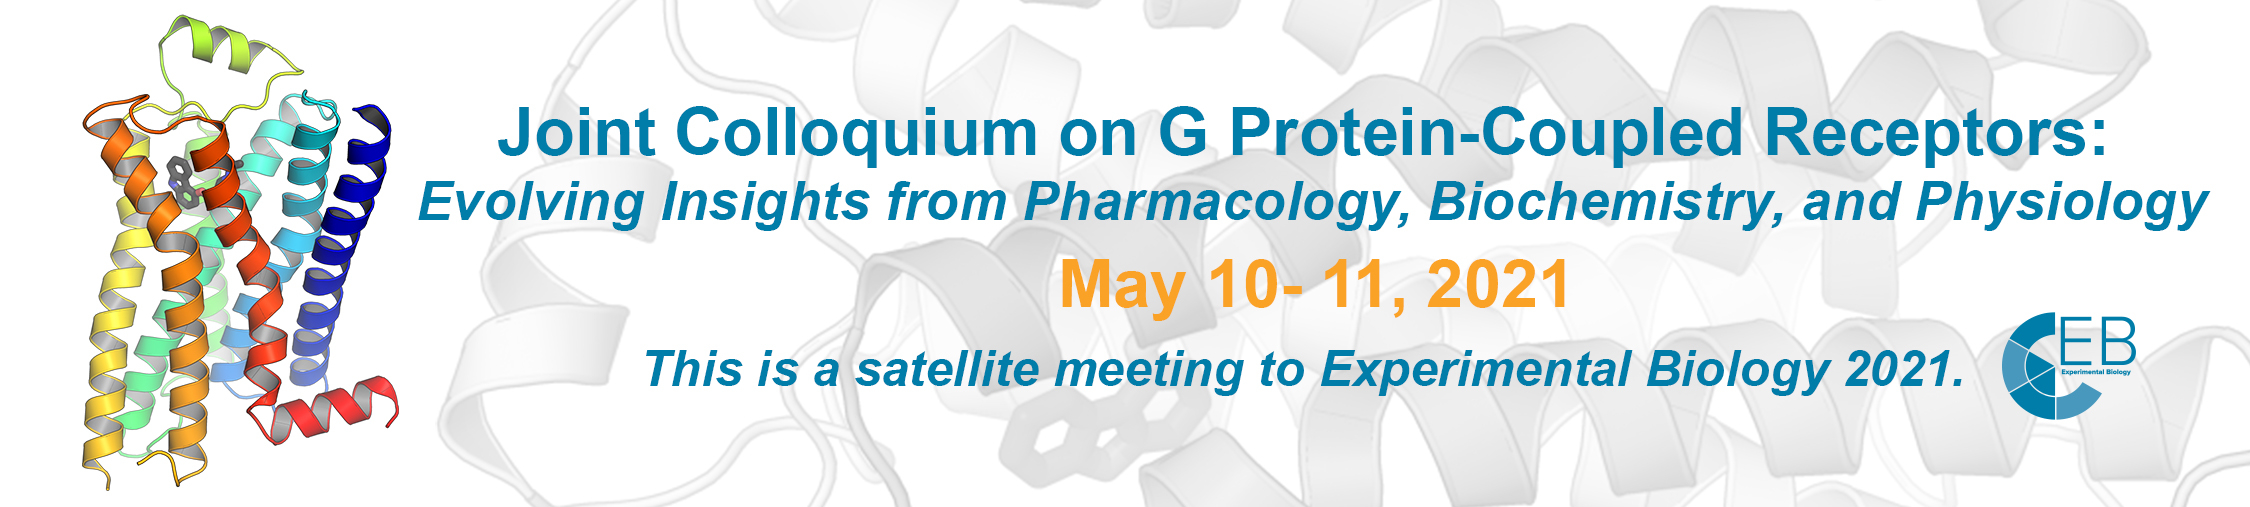 Joint Colloquium on G Protein-Coupled Receptors: Evolving Insights from Pharmacology, Biochemistry and Physiology